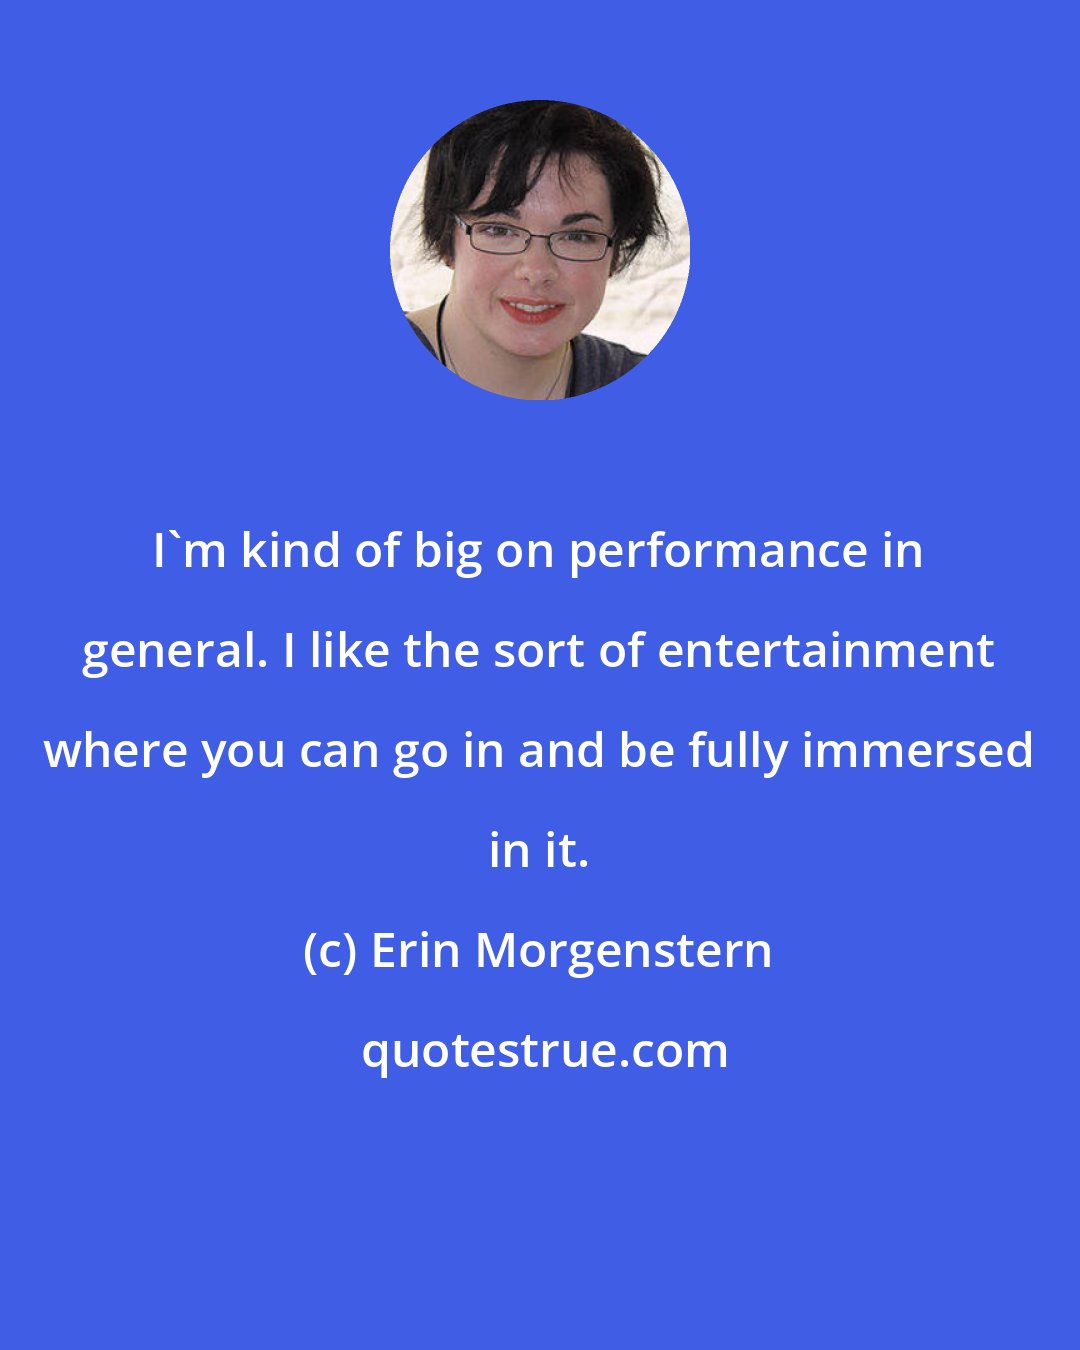 Erin Morgenstern: I'm kind of big on performance in general. I like the sort of entertainment where you can go in and be fully immersed in it.